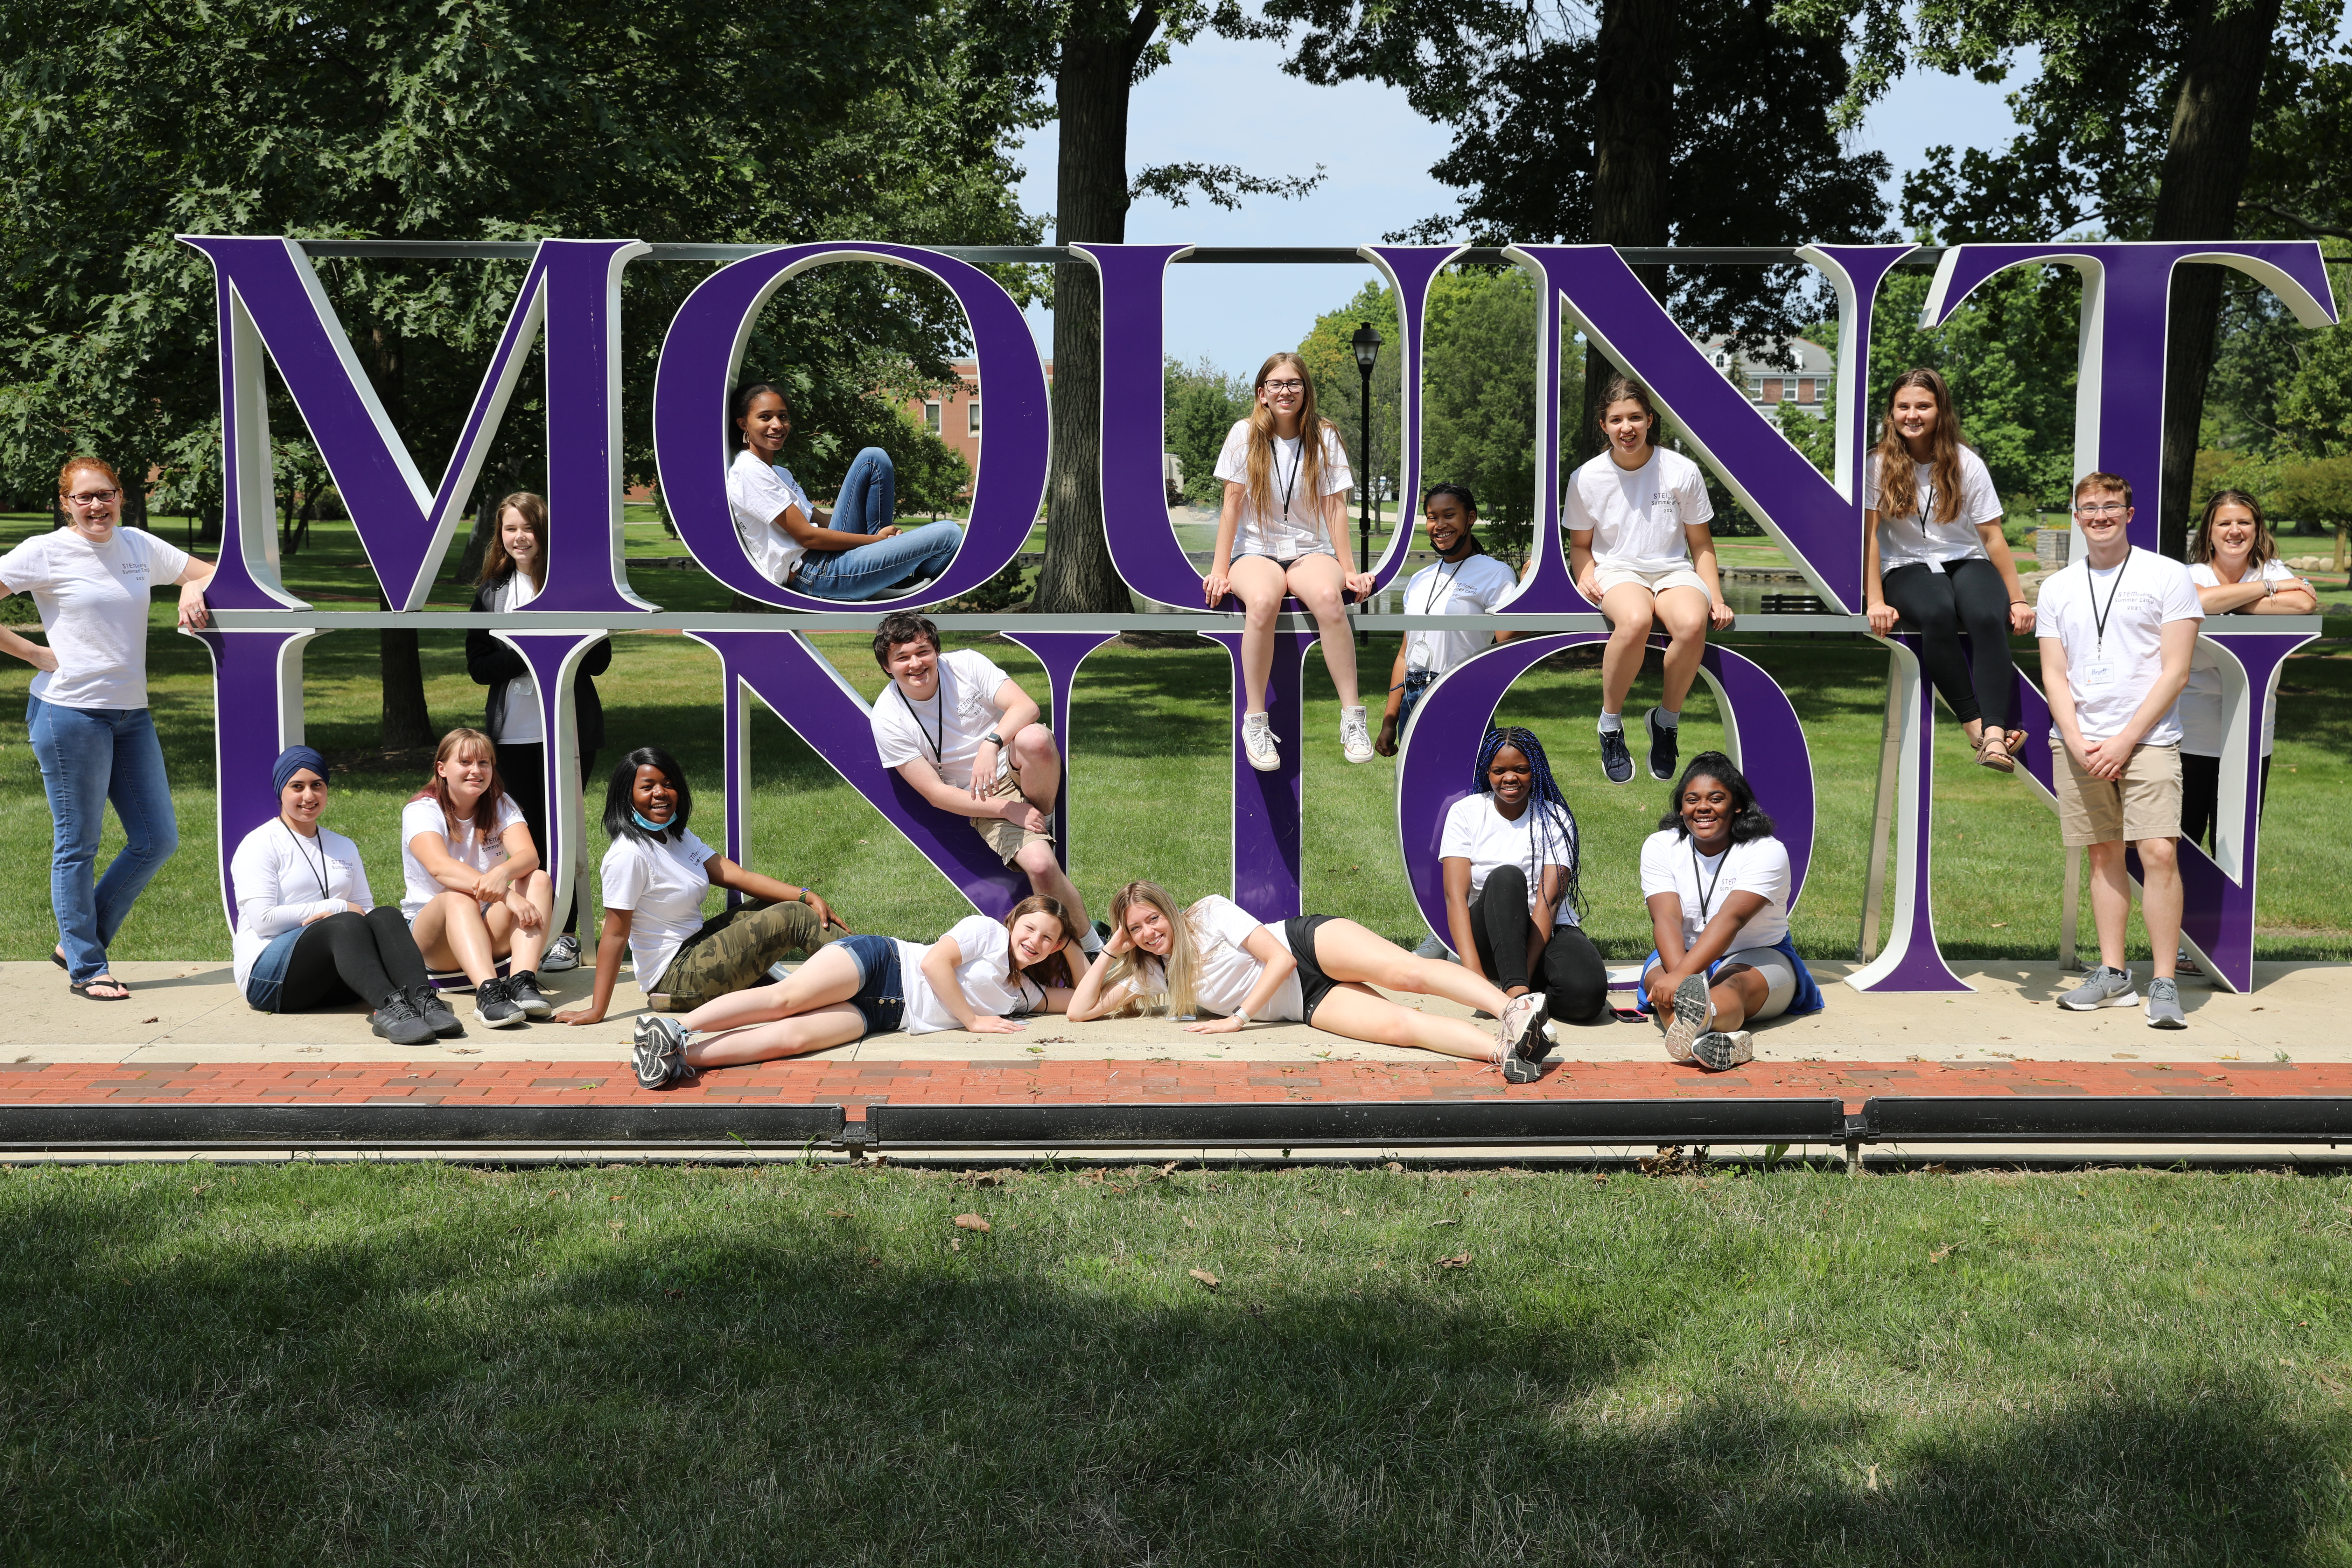 STEMcoding camp participants and staff pose in front of the Mount Union sign